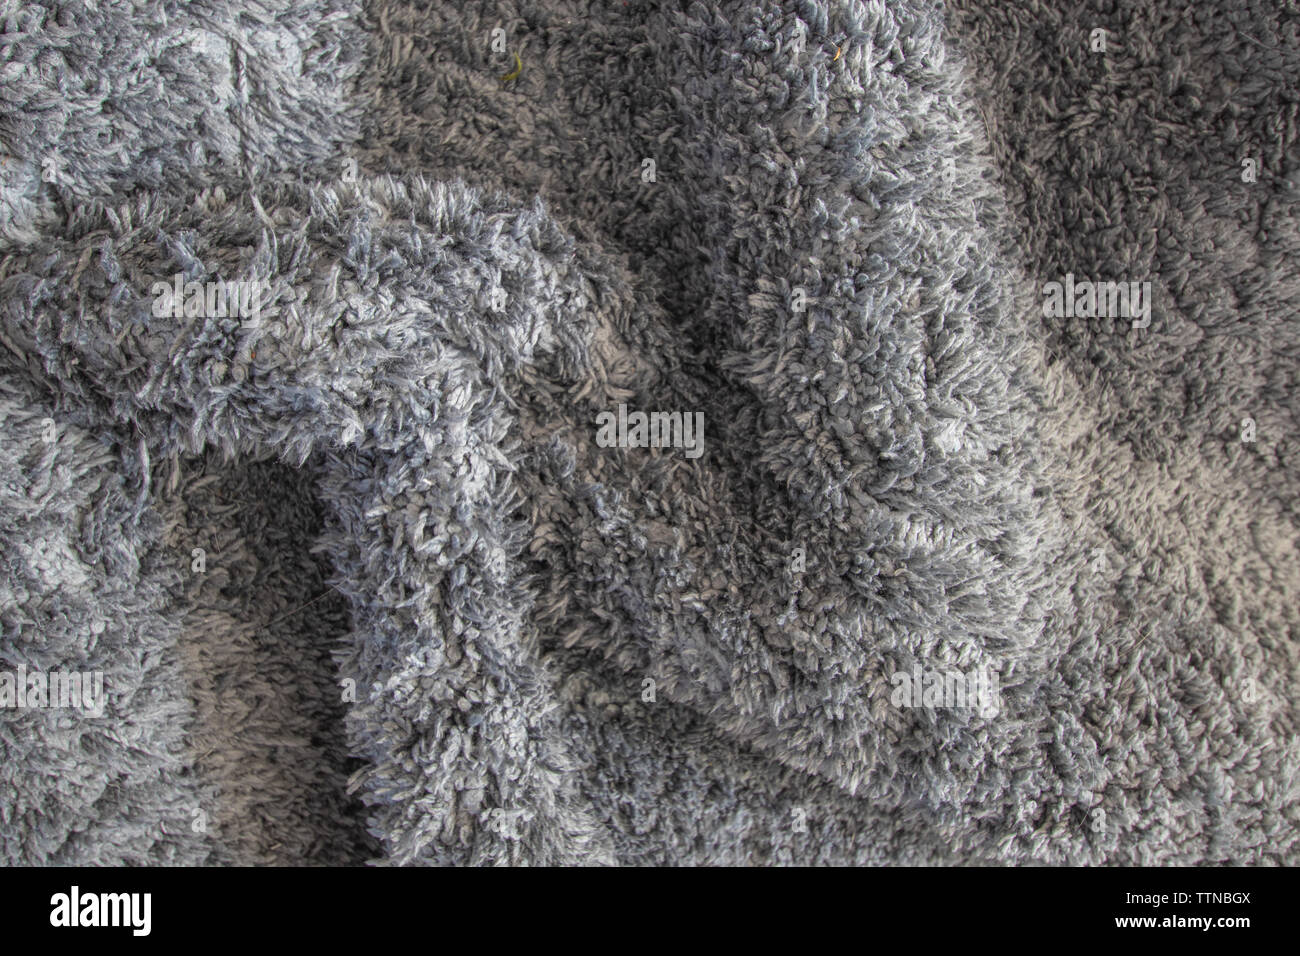 Fabric texture, textile and cloth material close-up. Stock Photo